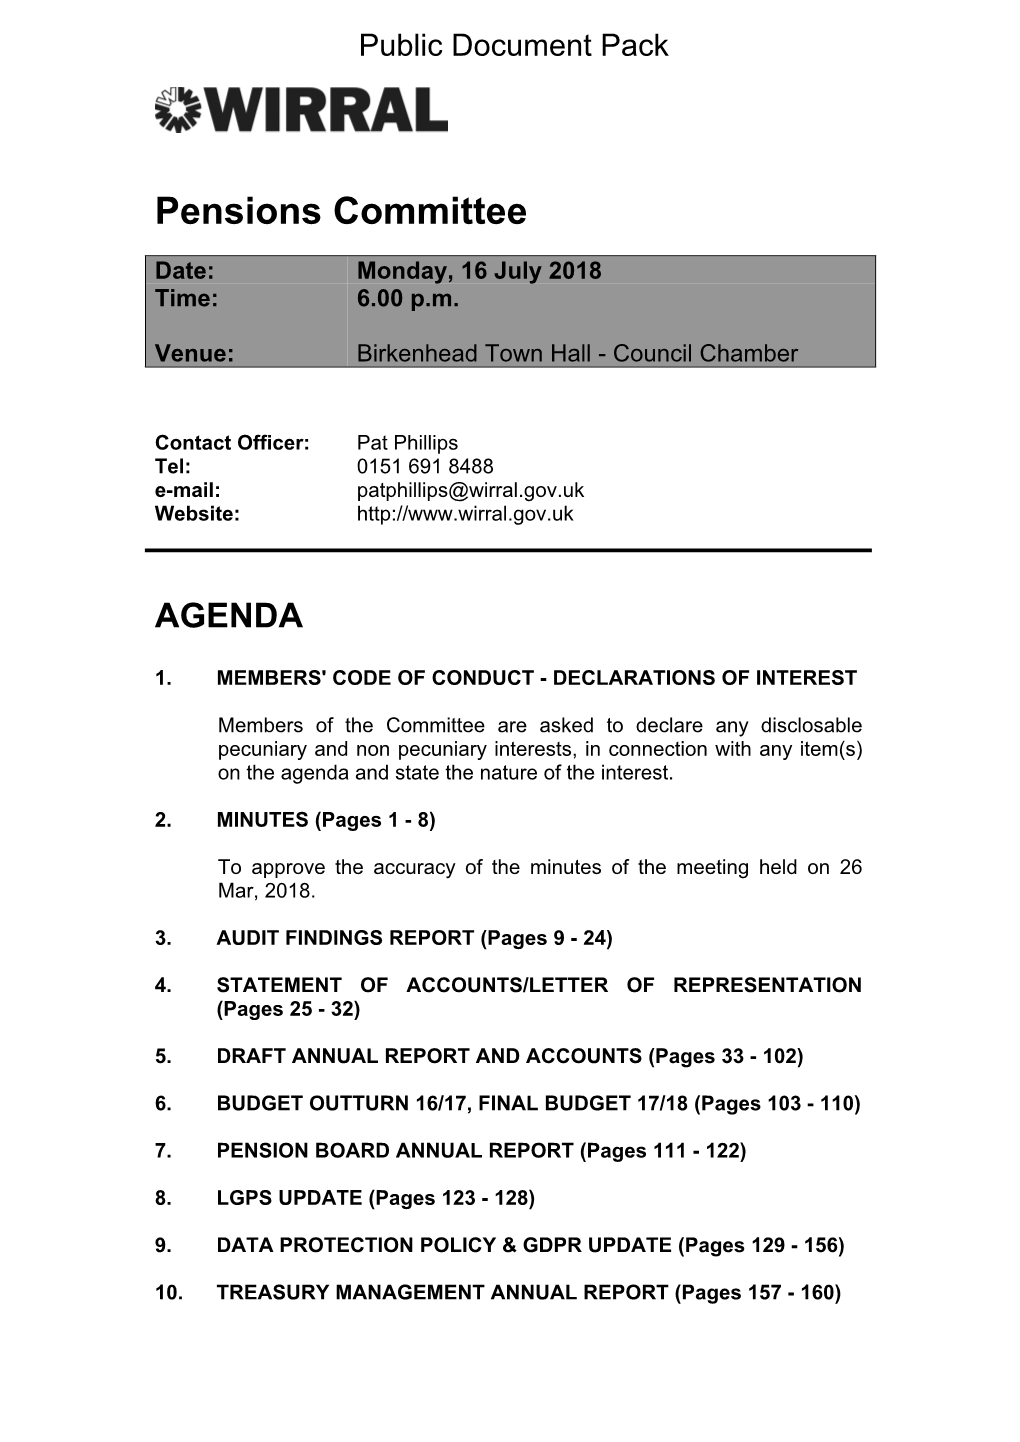 (Public Pack)Agenda Document for Pensions Committee, 16/07/2018 18:00